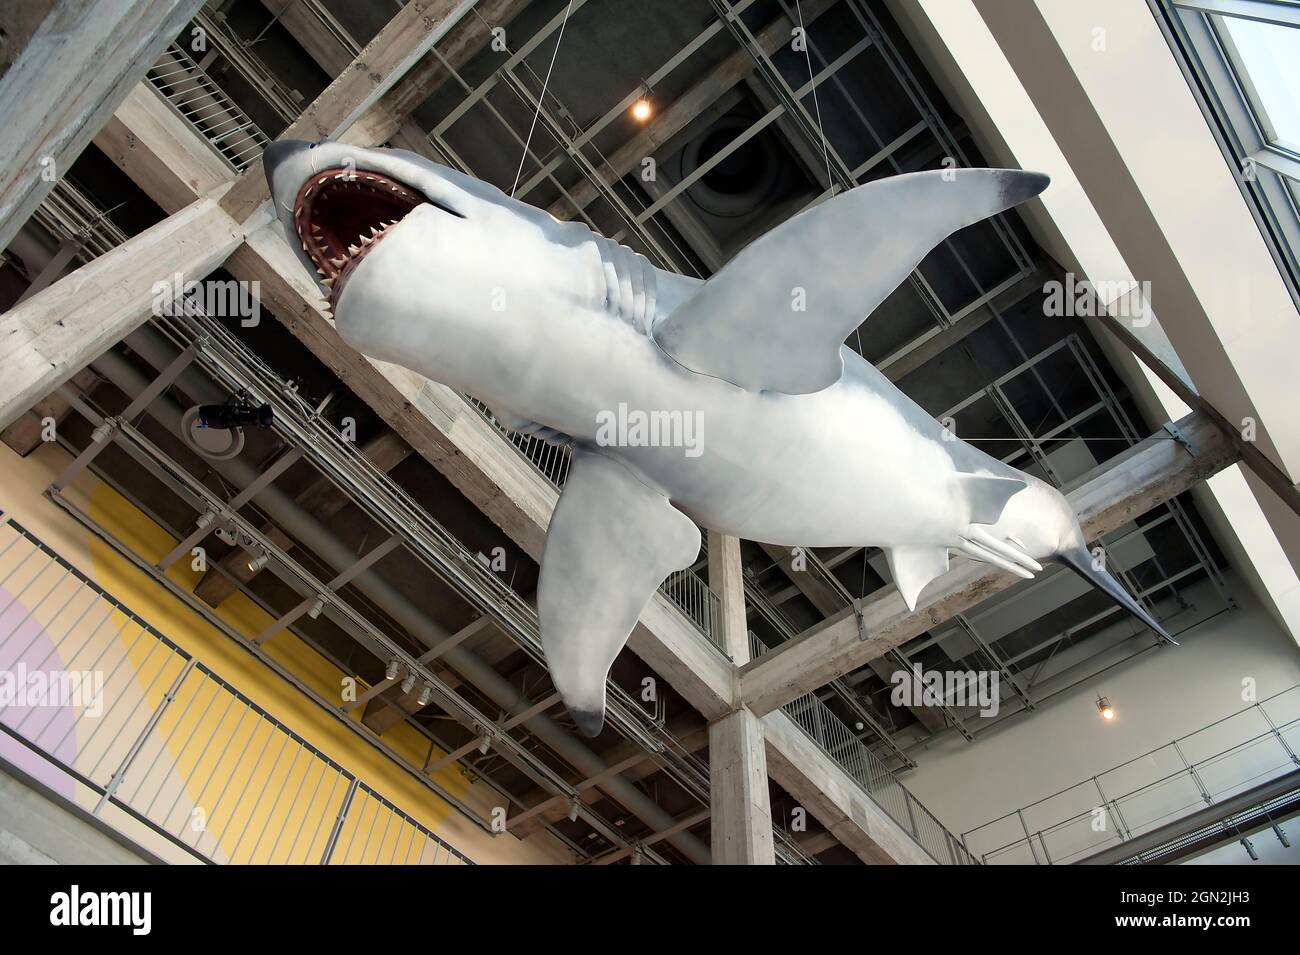 Academy Museum of Motion Pictures, Los Angeles, Kalifornien Stockfoto